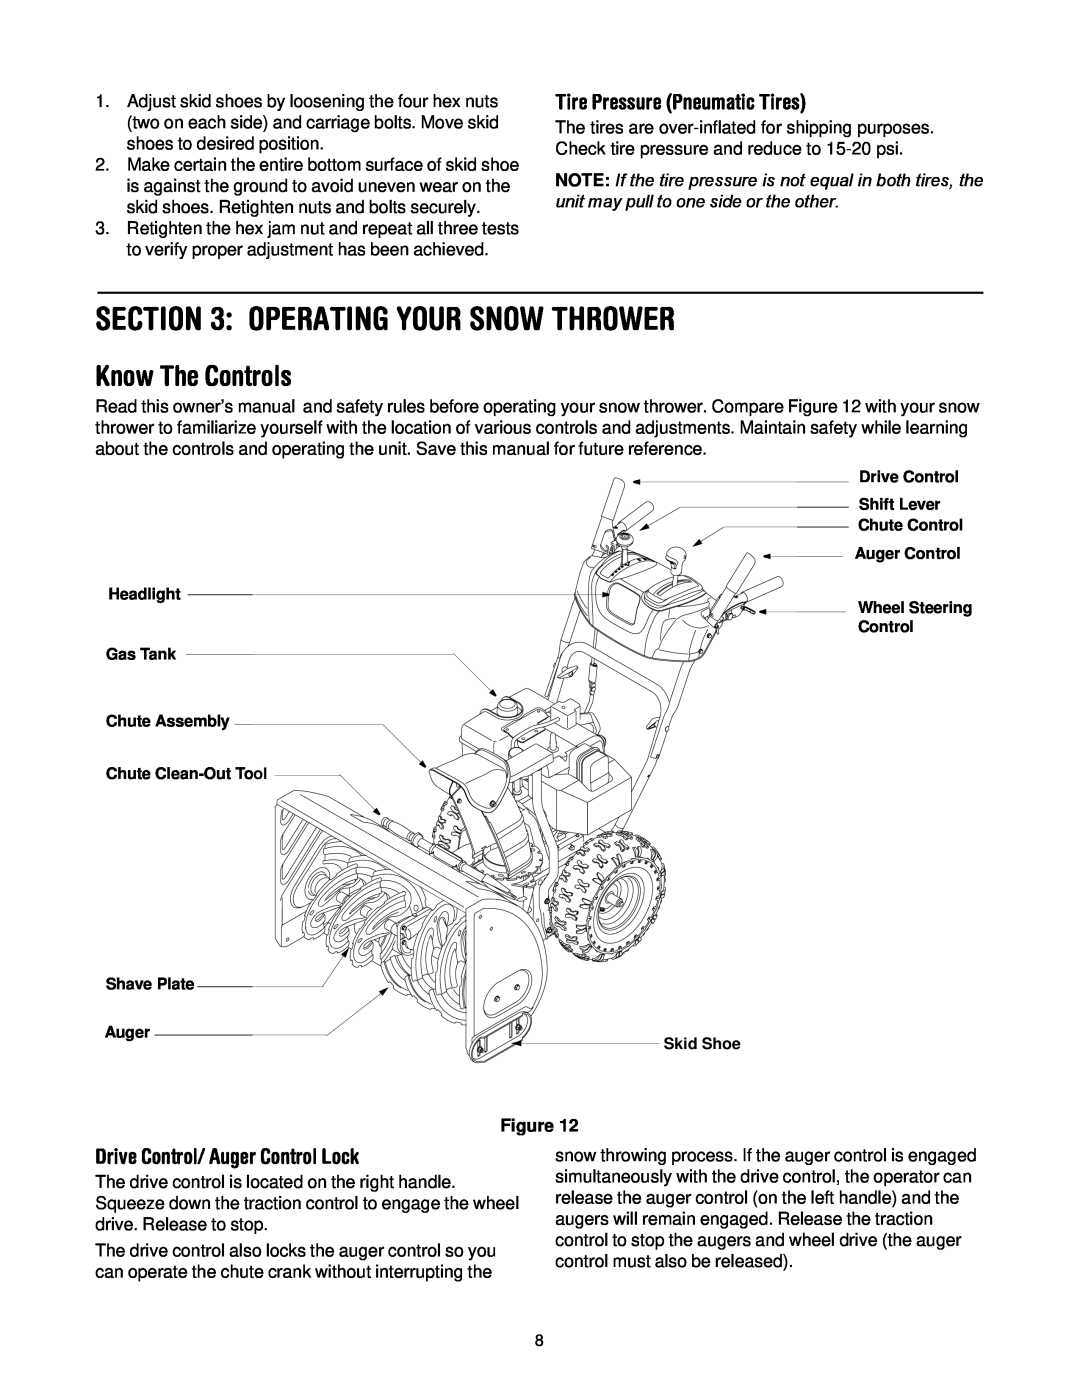 Troy-Bilt 500 series manual Operating Your Snow Thrower, Know The Controls, Tire Pressure Pneumatic Tires 